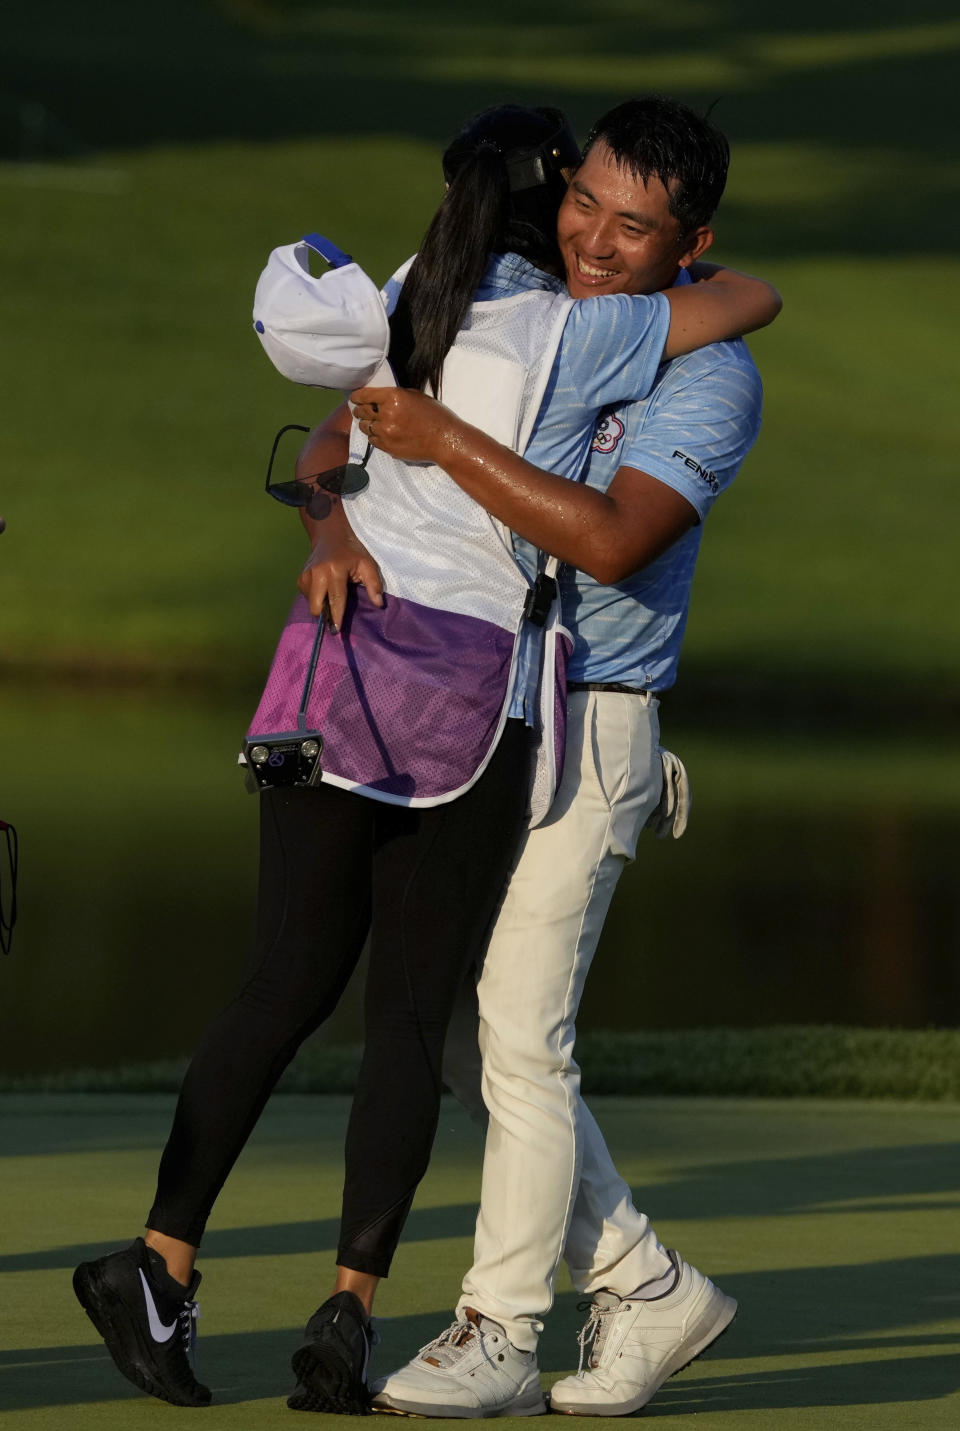 Cheng Pan of Taiwan is congratulated by his caddie after winning the bronze medal during the final round of the men's golf event at the 2020 Summer Olympics on Sunday, Aug. 1, 2021, in Kawagoe, Japan. (AP Photo/Andy Wong)